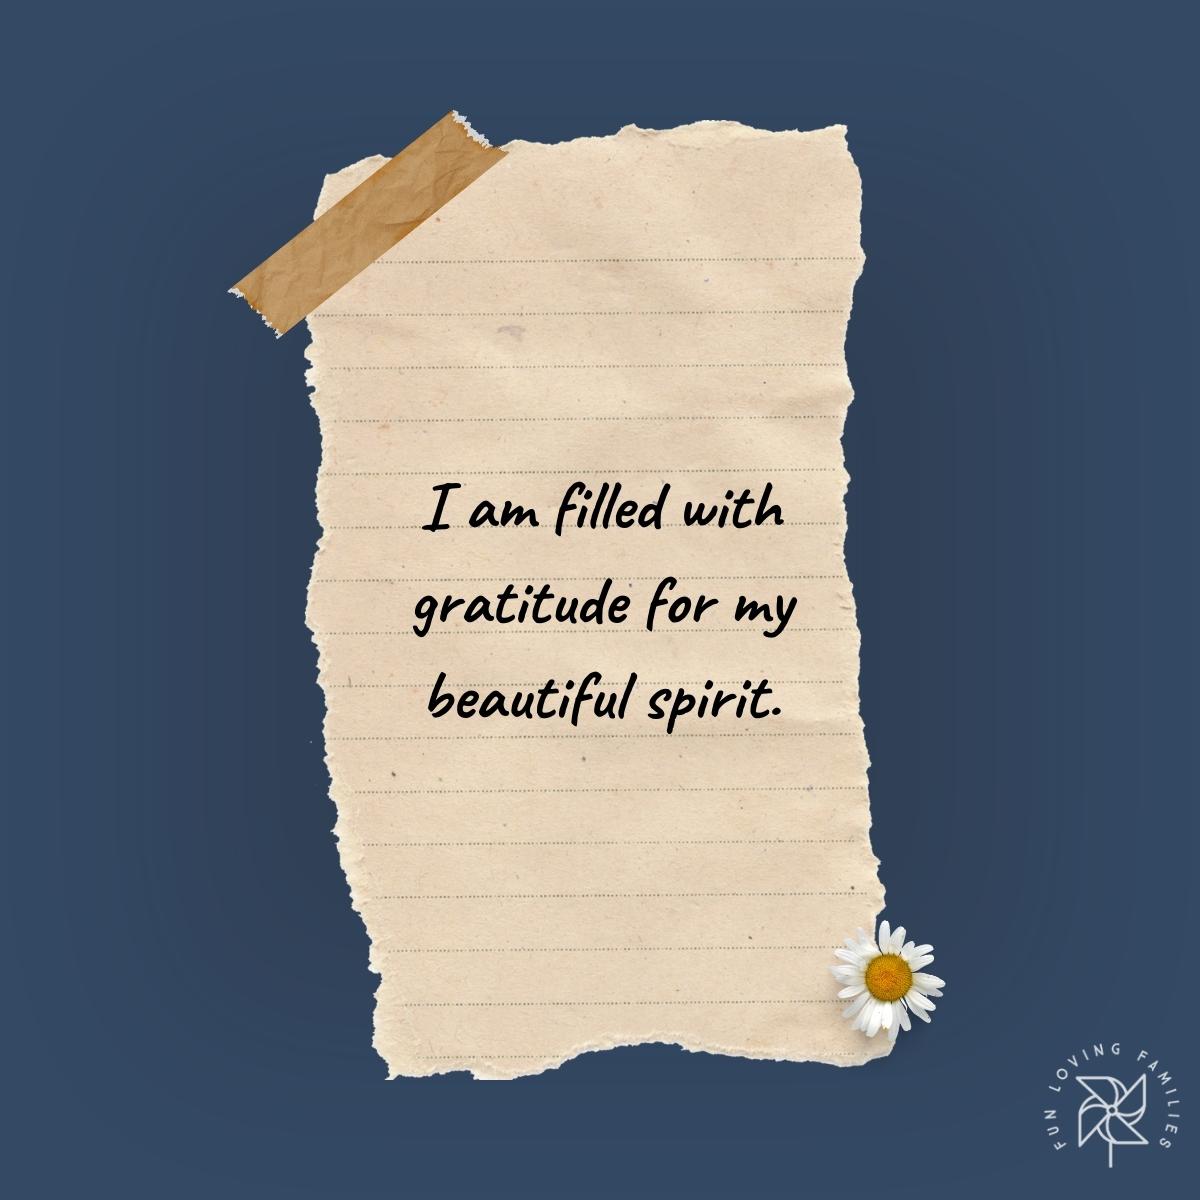 I am filled with gratitude for my beautiful spirit affirmation